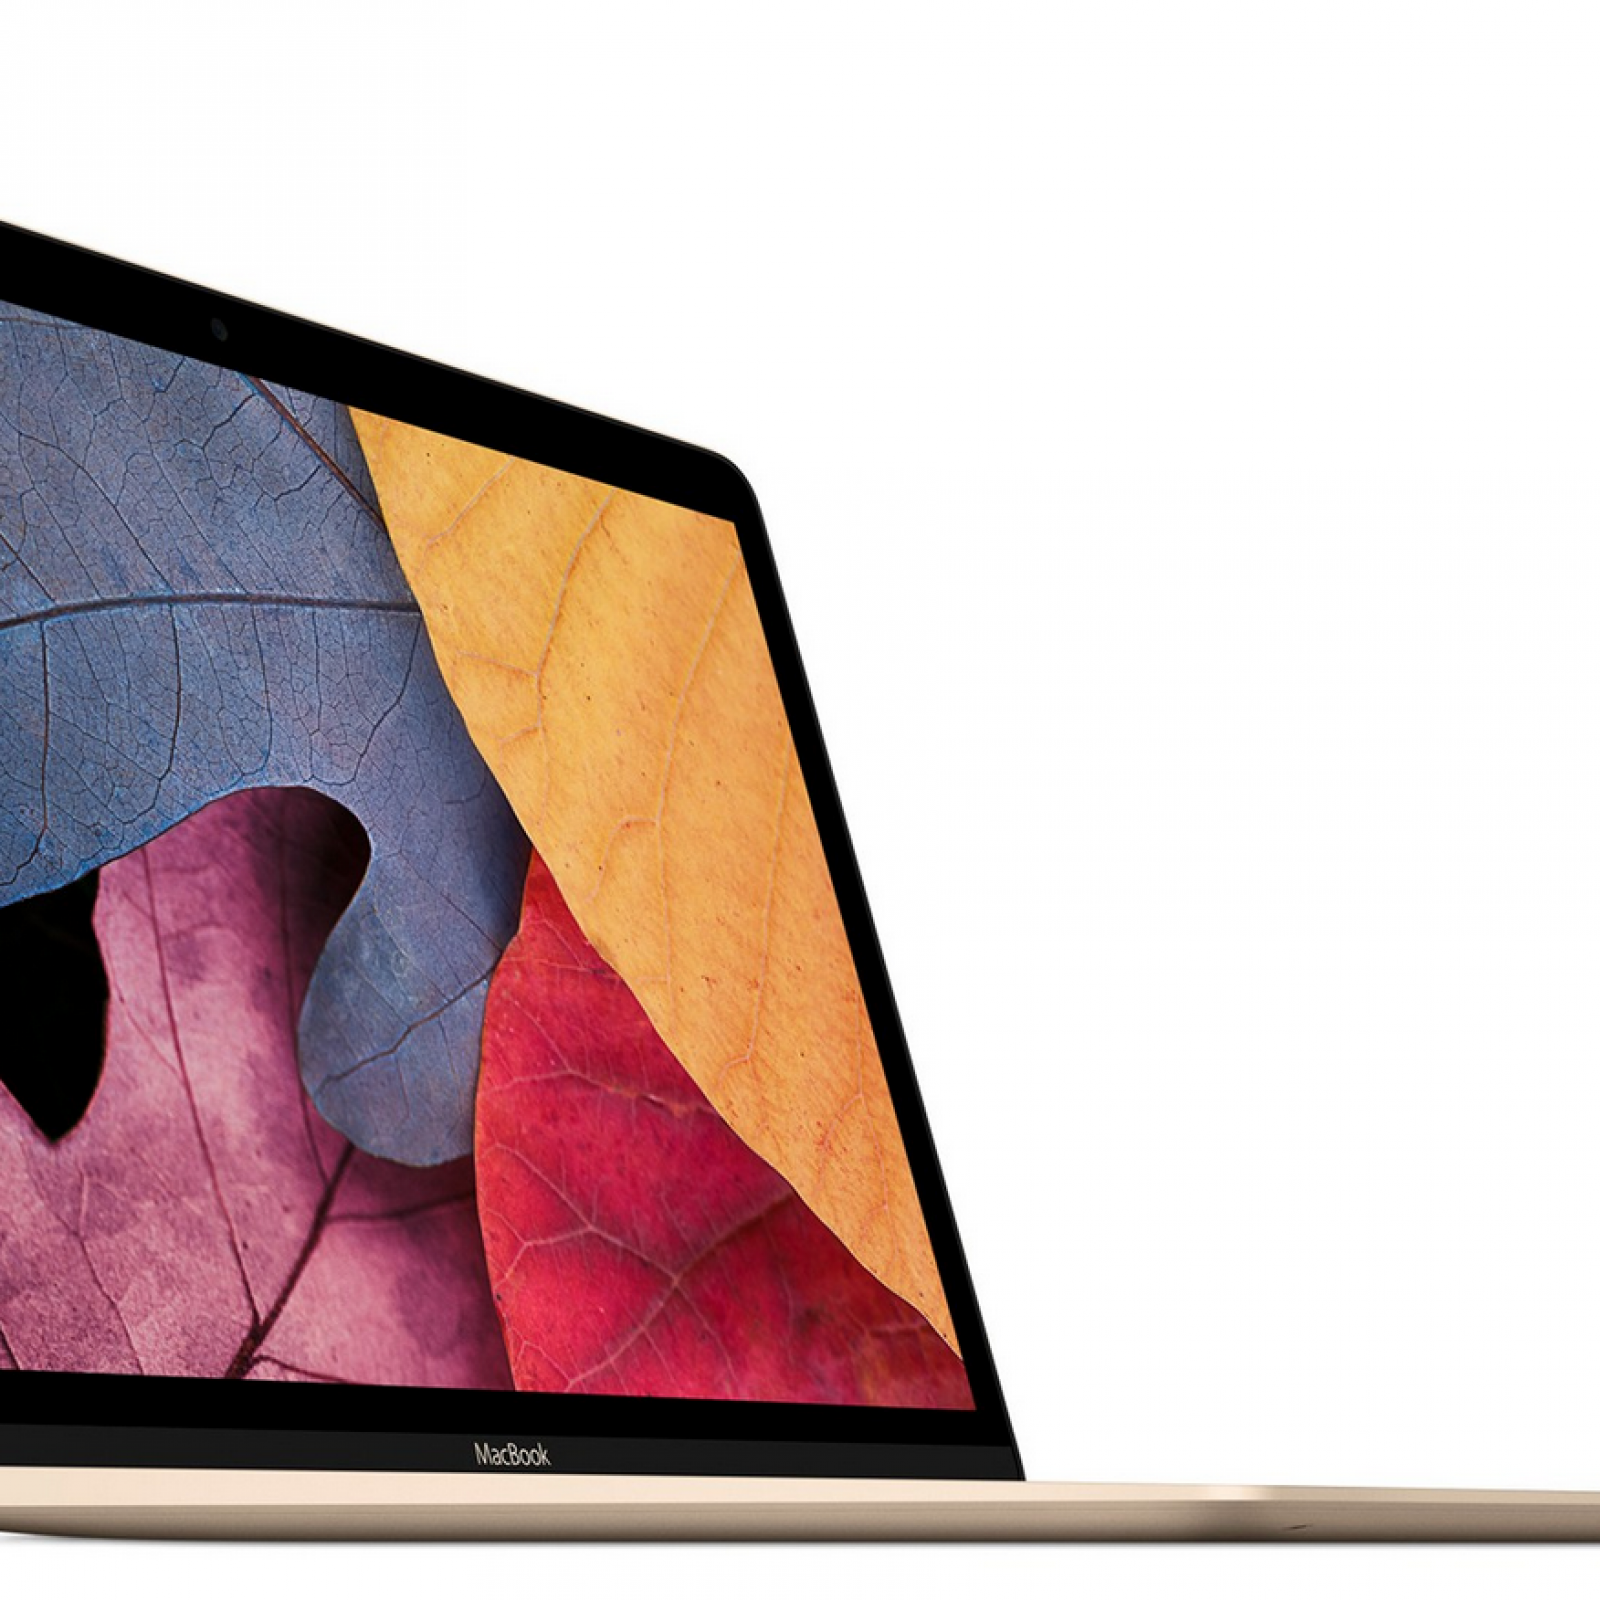 MacBook (2015) Review – the most beautiful portable laptop ever